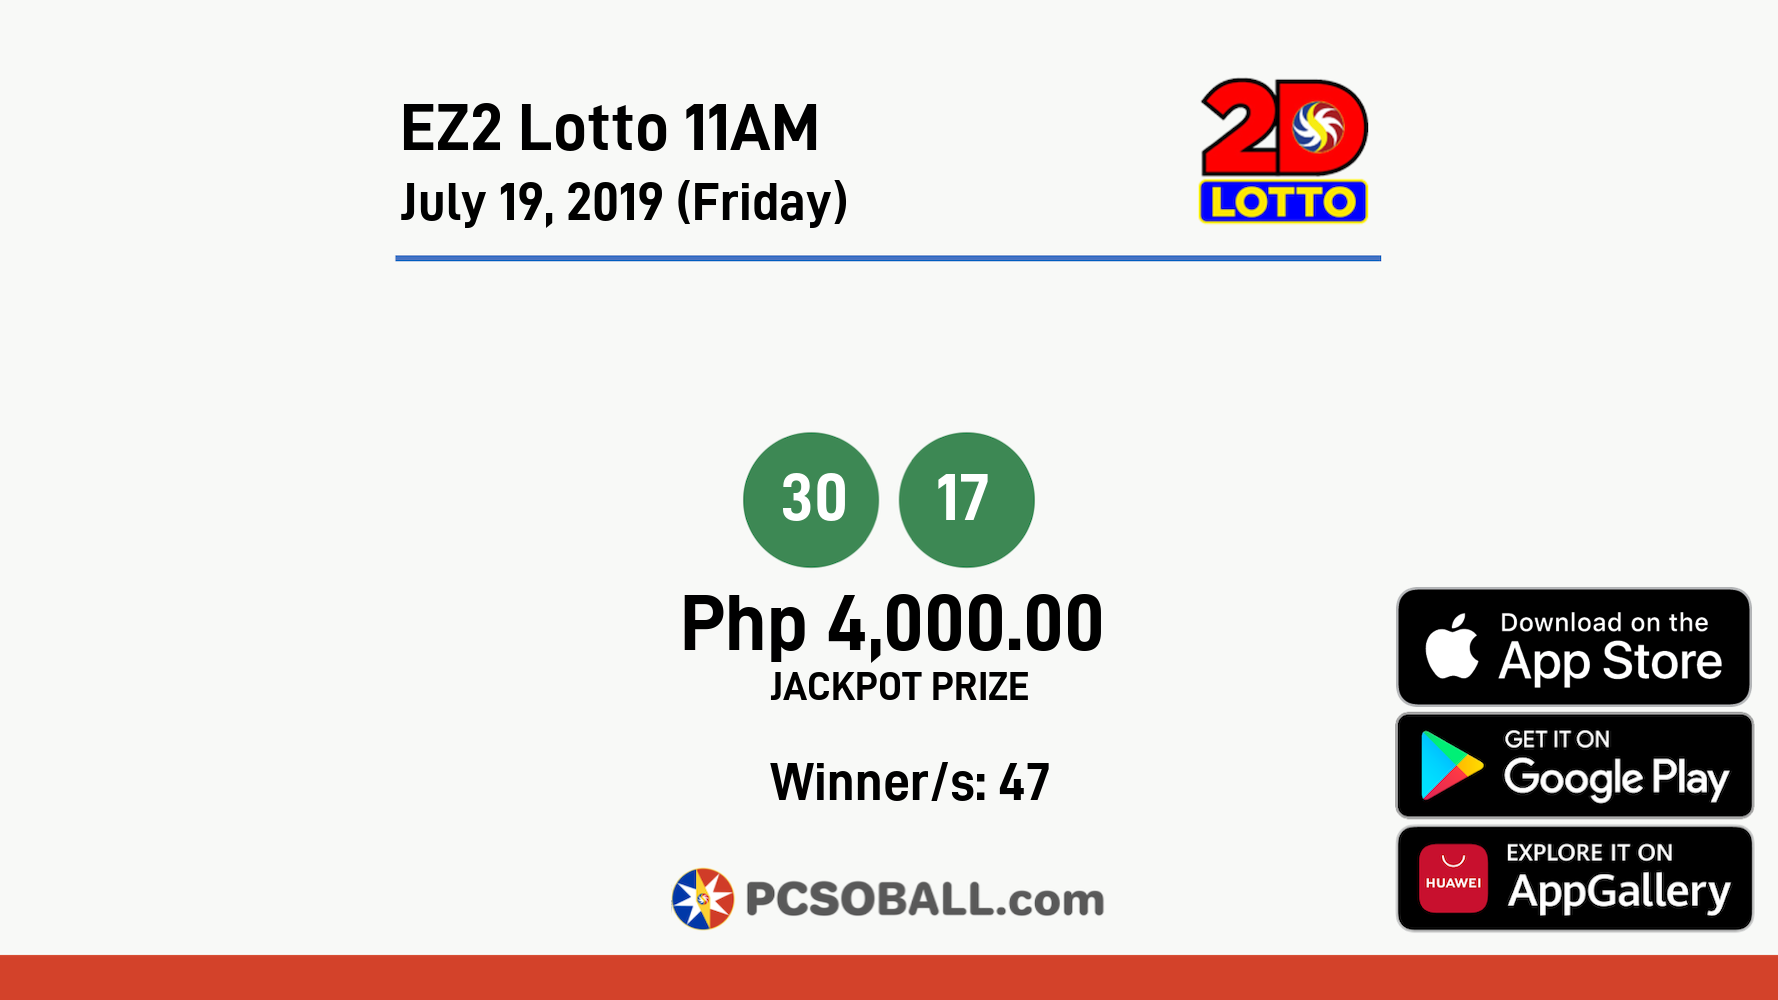 EZ2 Lotto 11AM July 19, 2019 (Friday) Result